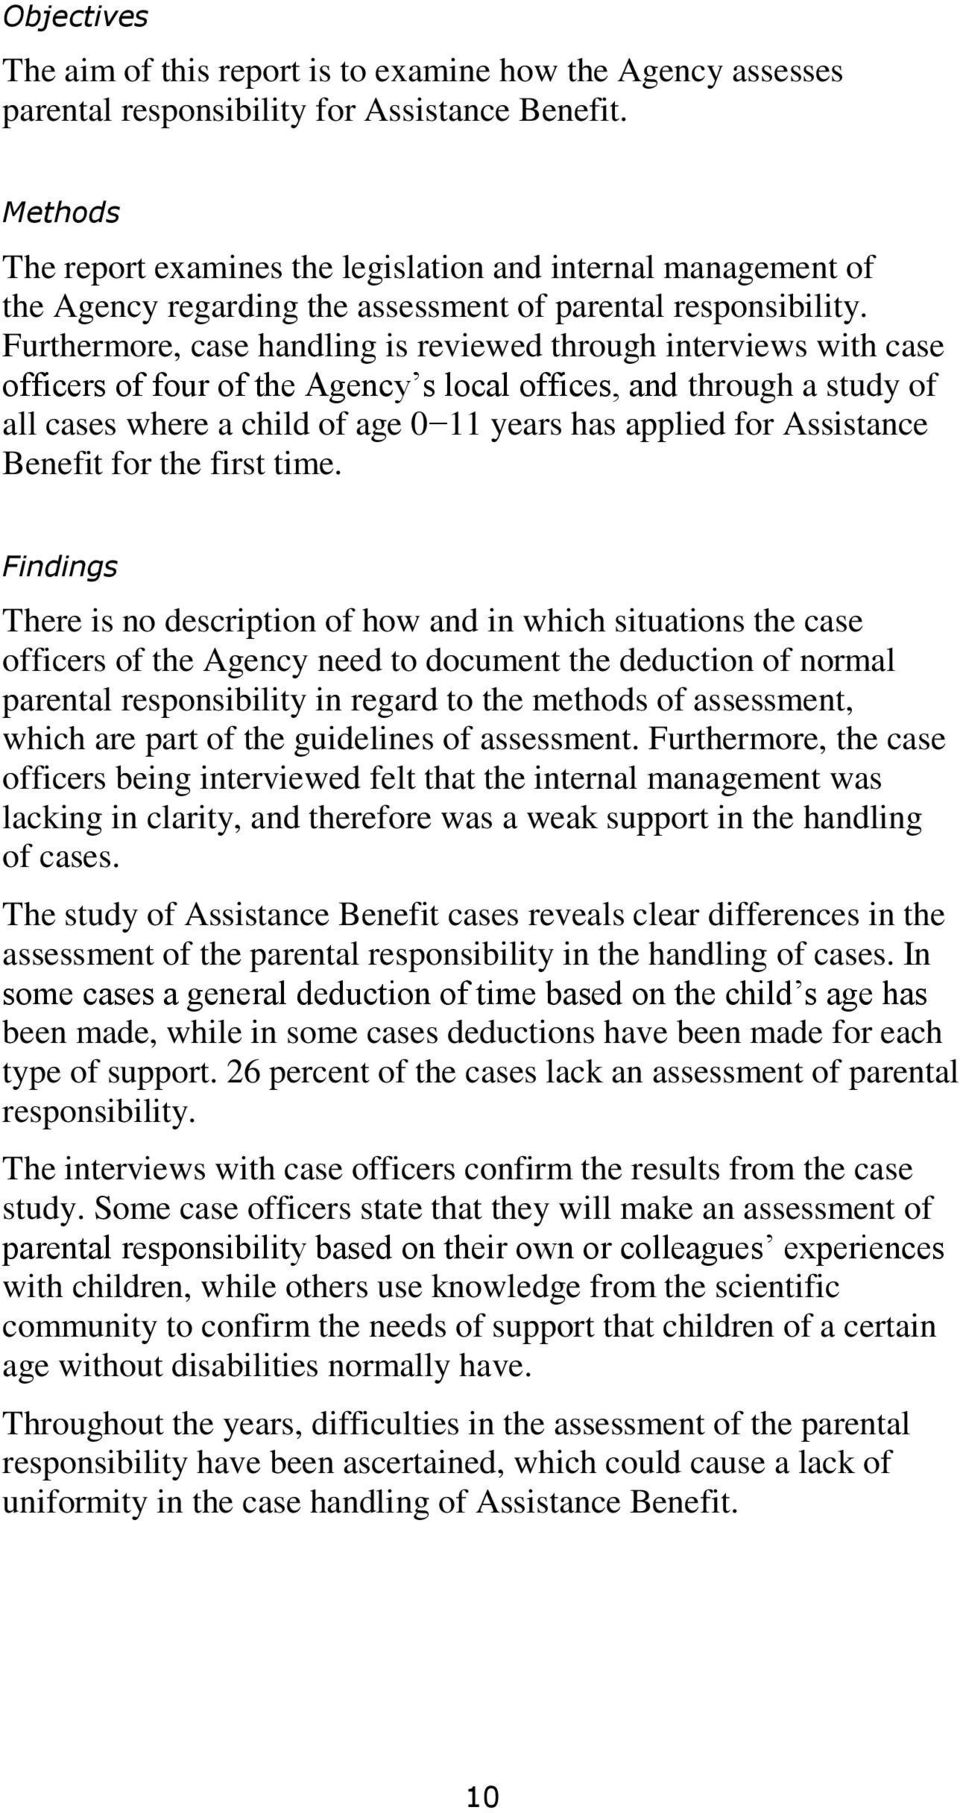 Furthermore, case handling is reviewed through interviews with case officers of four of the Agency s local offices, and through a study of all cases where a child of age 0 11 years has applied for